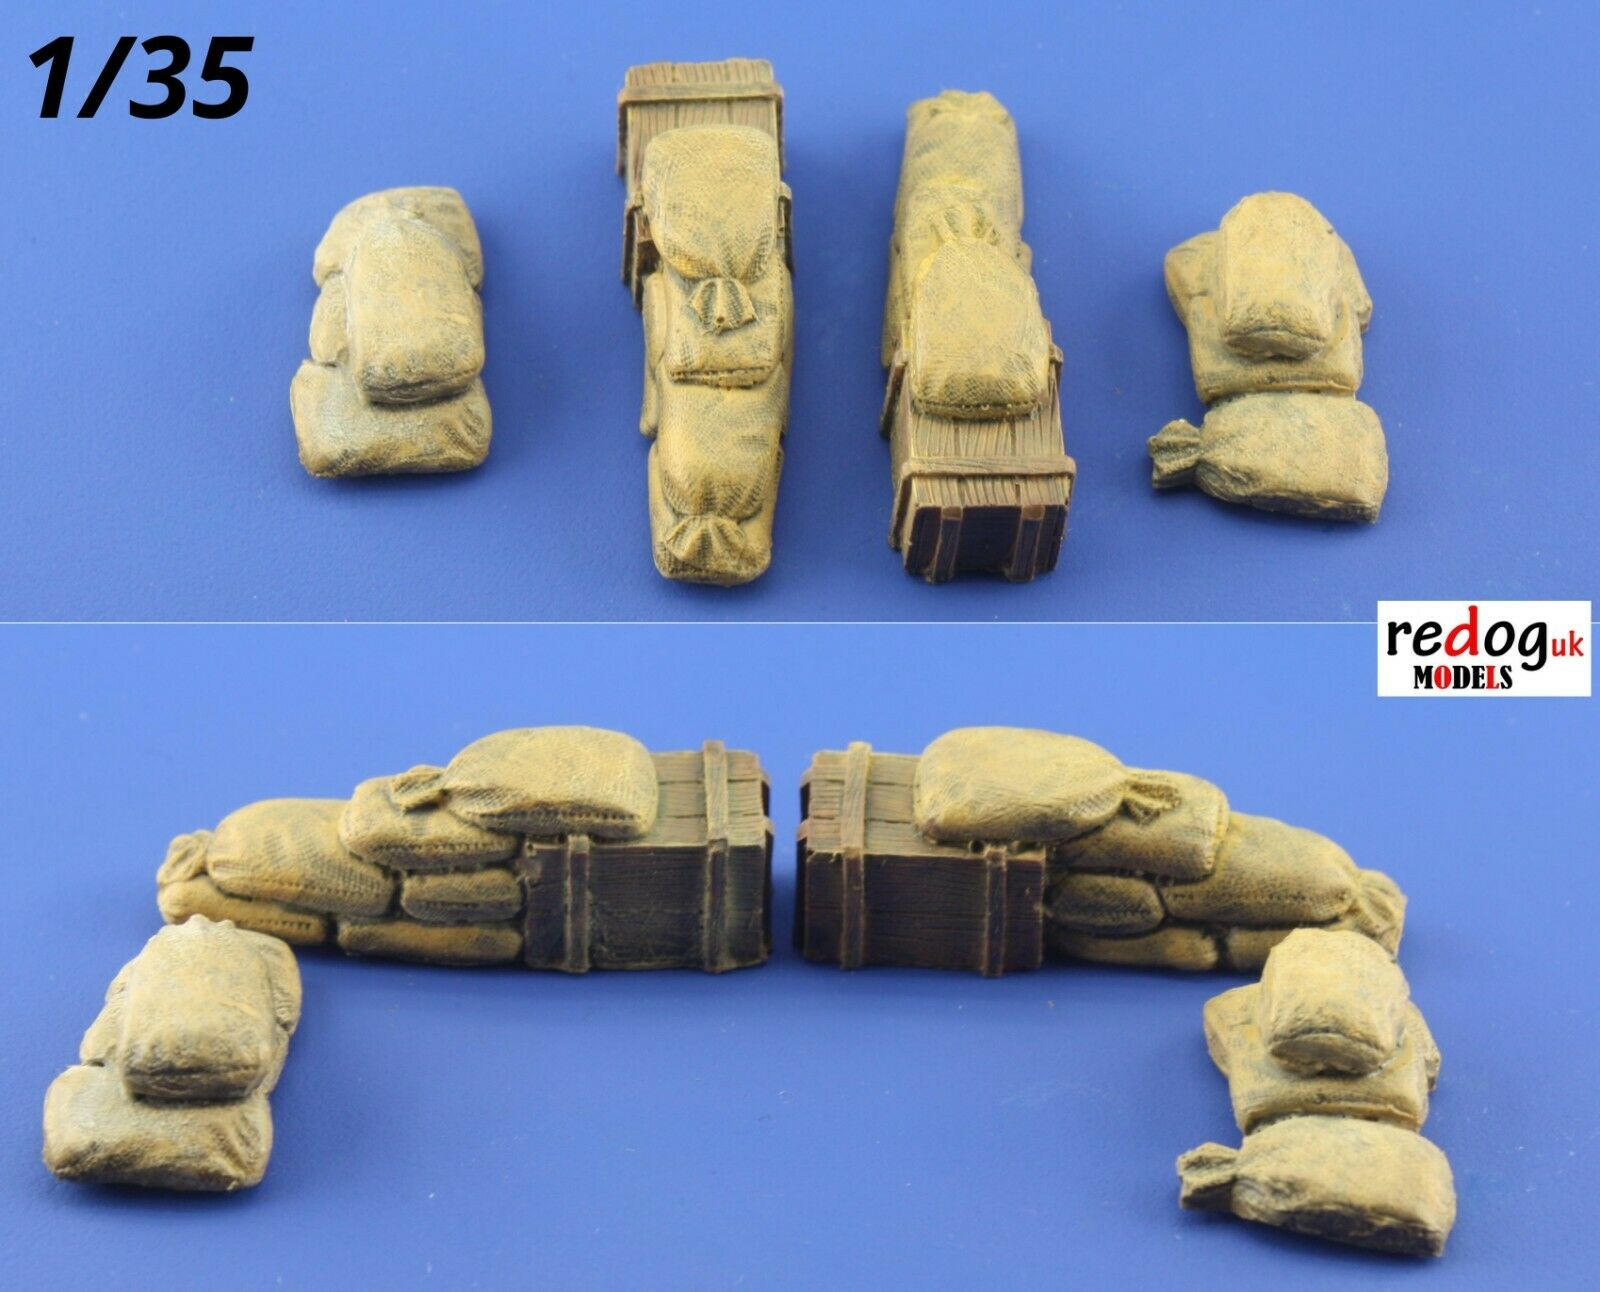 Redog 1/35 Sandbags for Trenches / Resin Scale Model Diorama Kit /3515 - redoguk